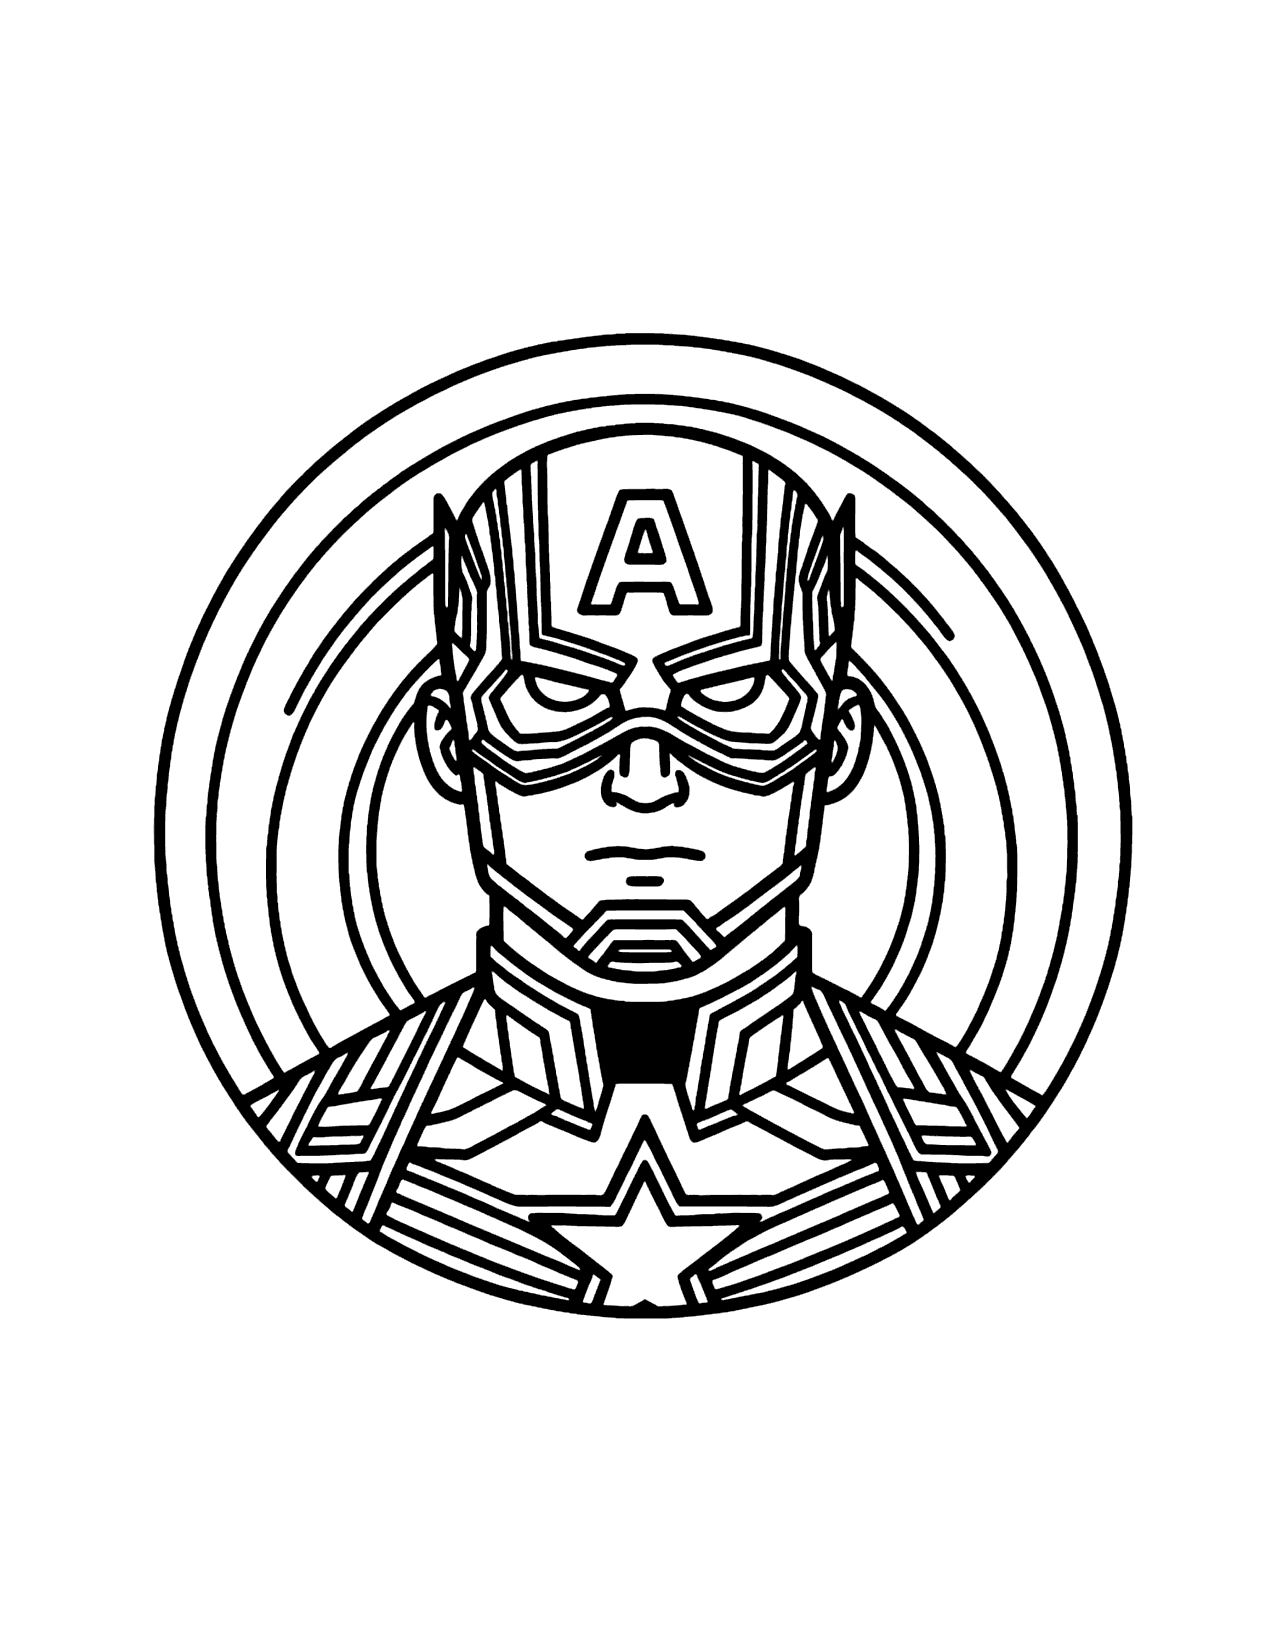 Captain America Graphic For Coloring